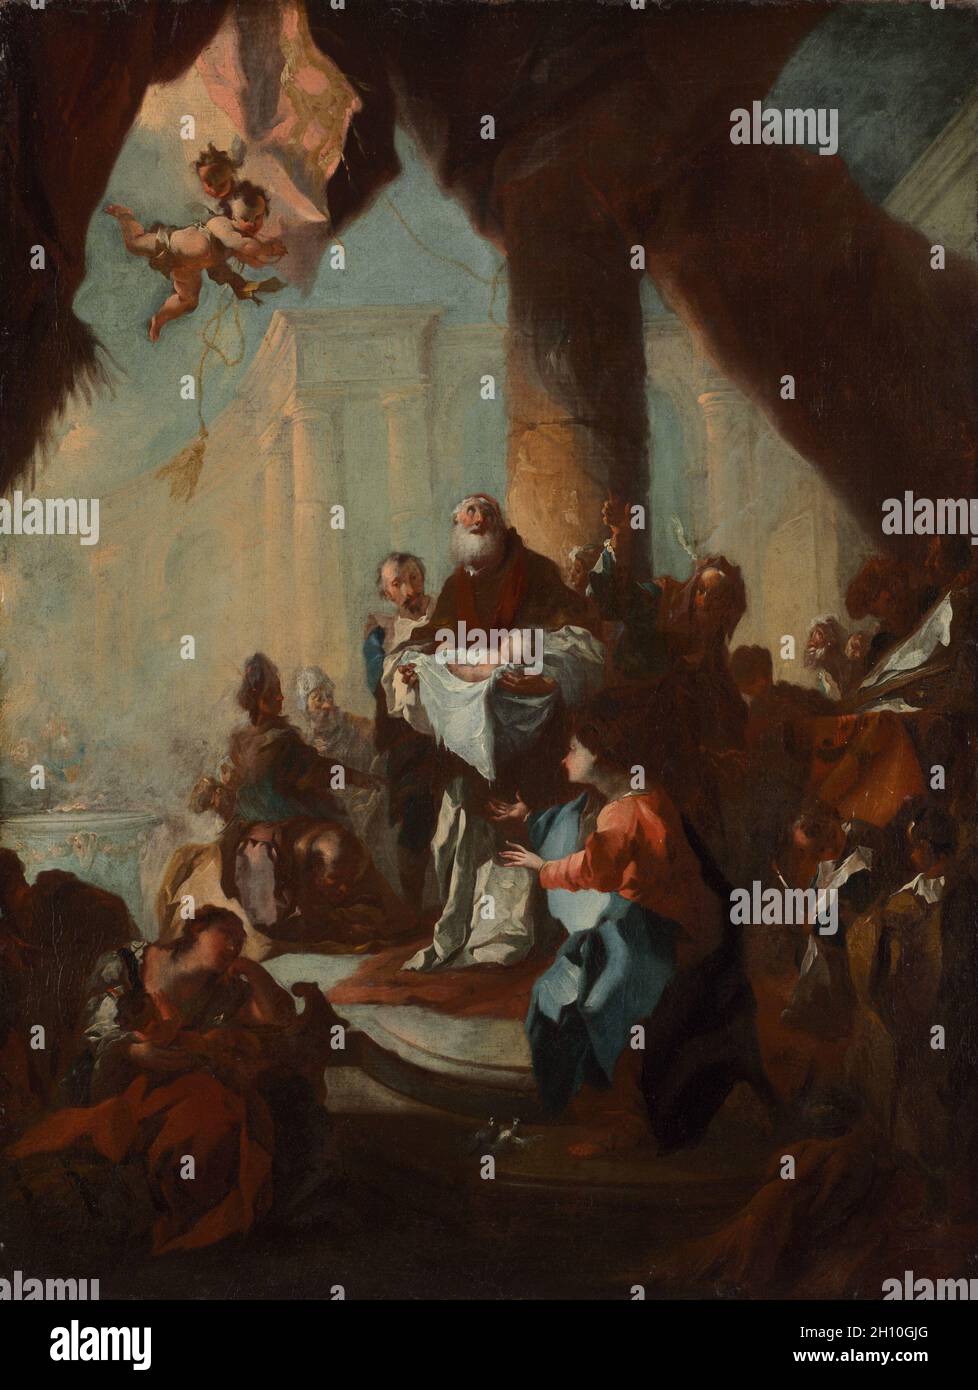 Study for 'The Presentation of Christ in the Temple' (for Saint Ulrich, Vienna), c. 1750. Attributed to Franz Anton Maulbertsch (Austrian, 1724-1796). Oil on canvas; framed: 90 x 70 x 9 cm (35 7/16 x 27 9/16 x 3 9/16 in.); unframed: 69.5 x 52.3 cm (27 3/8 x 20 9/16 in.). Stock Photo